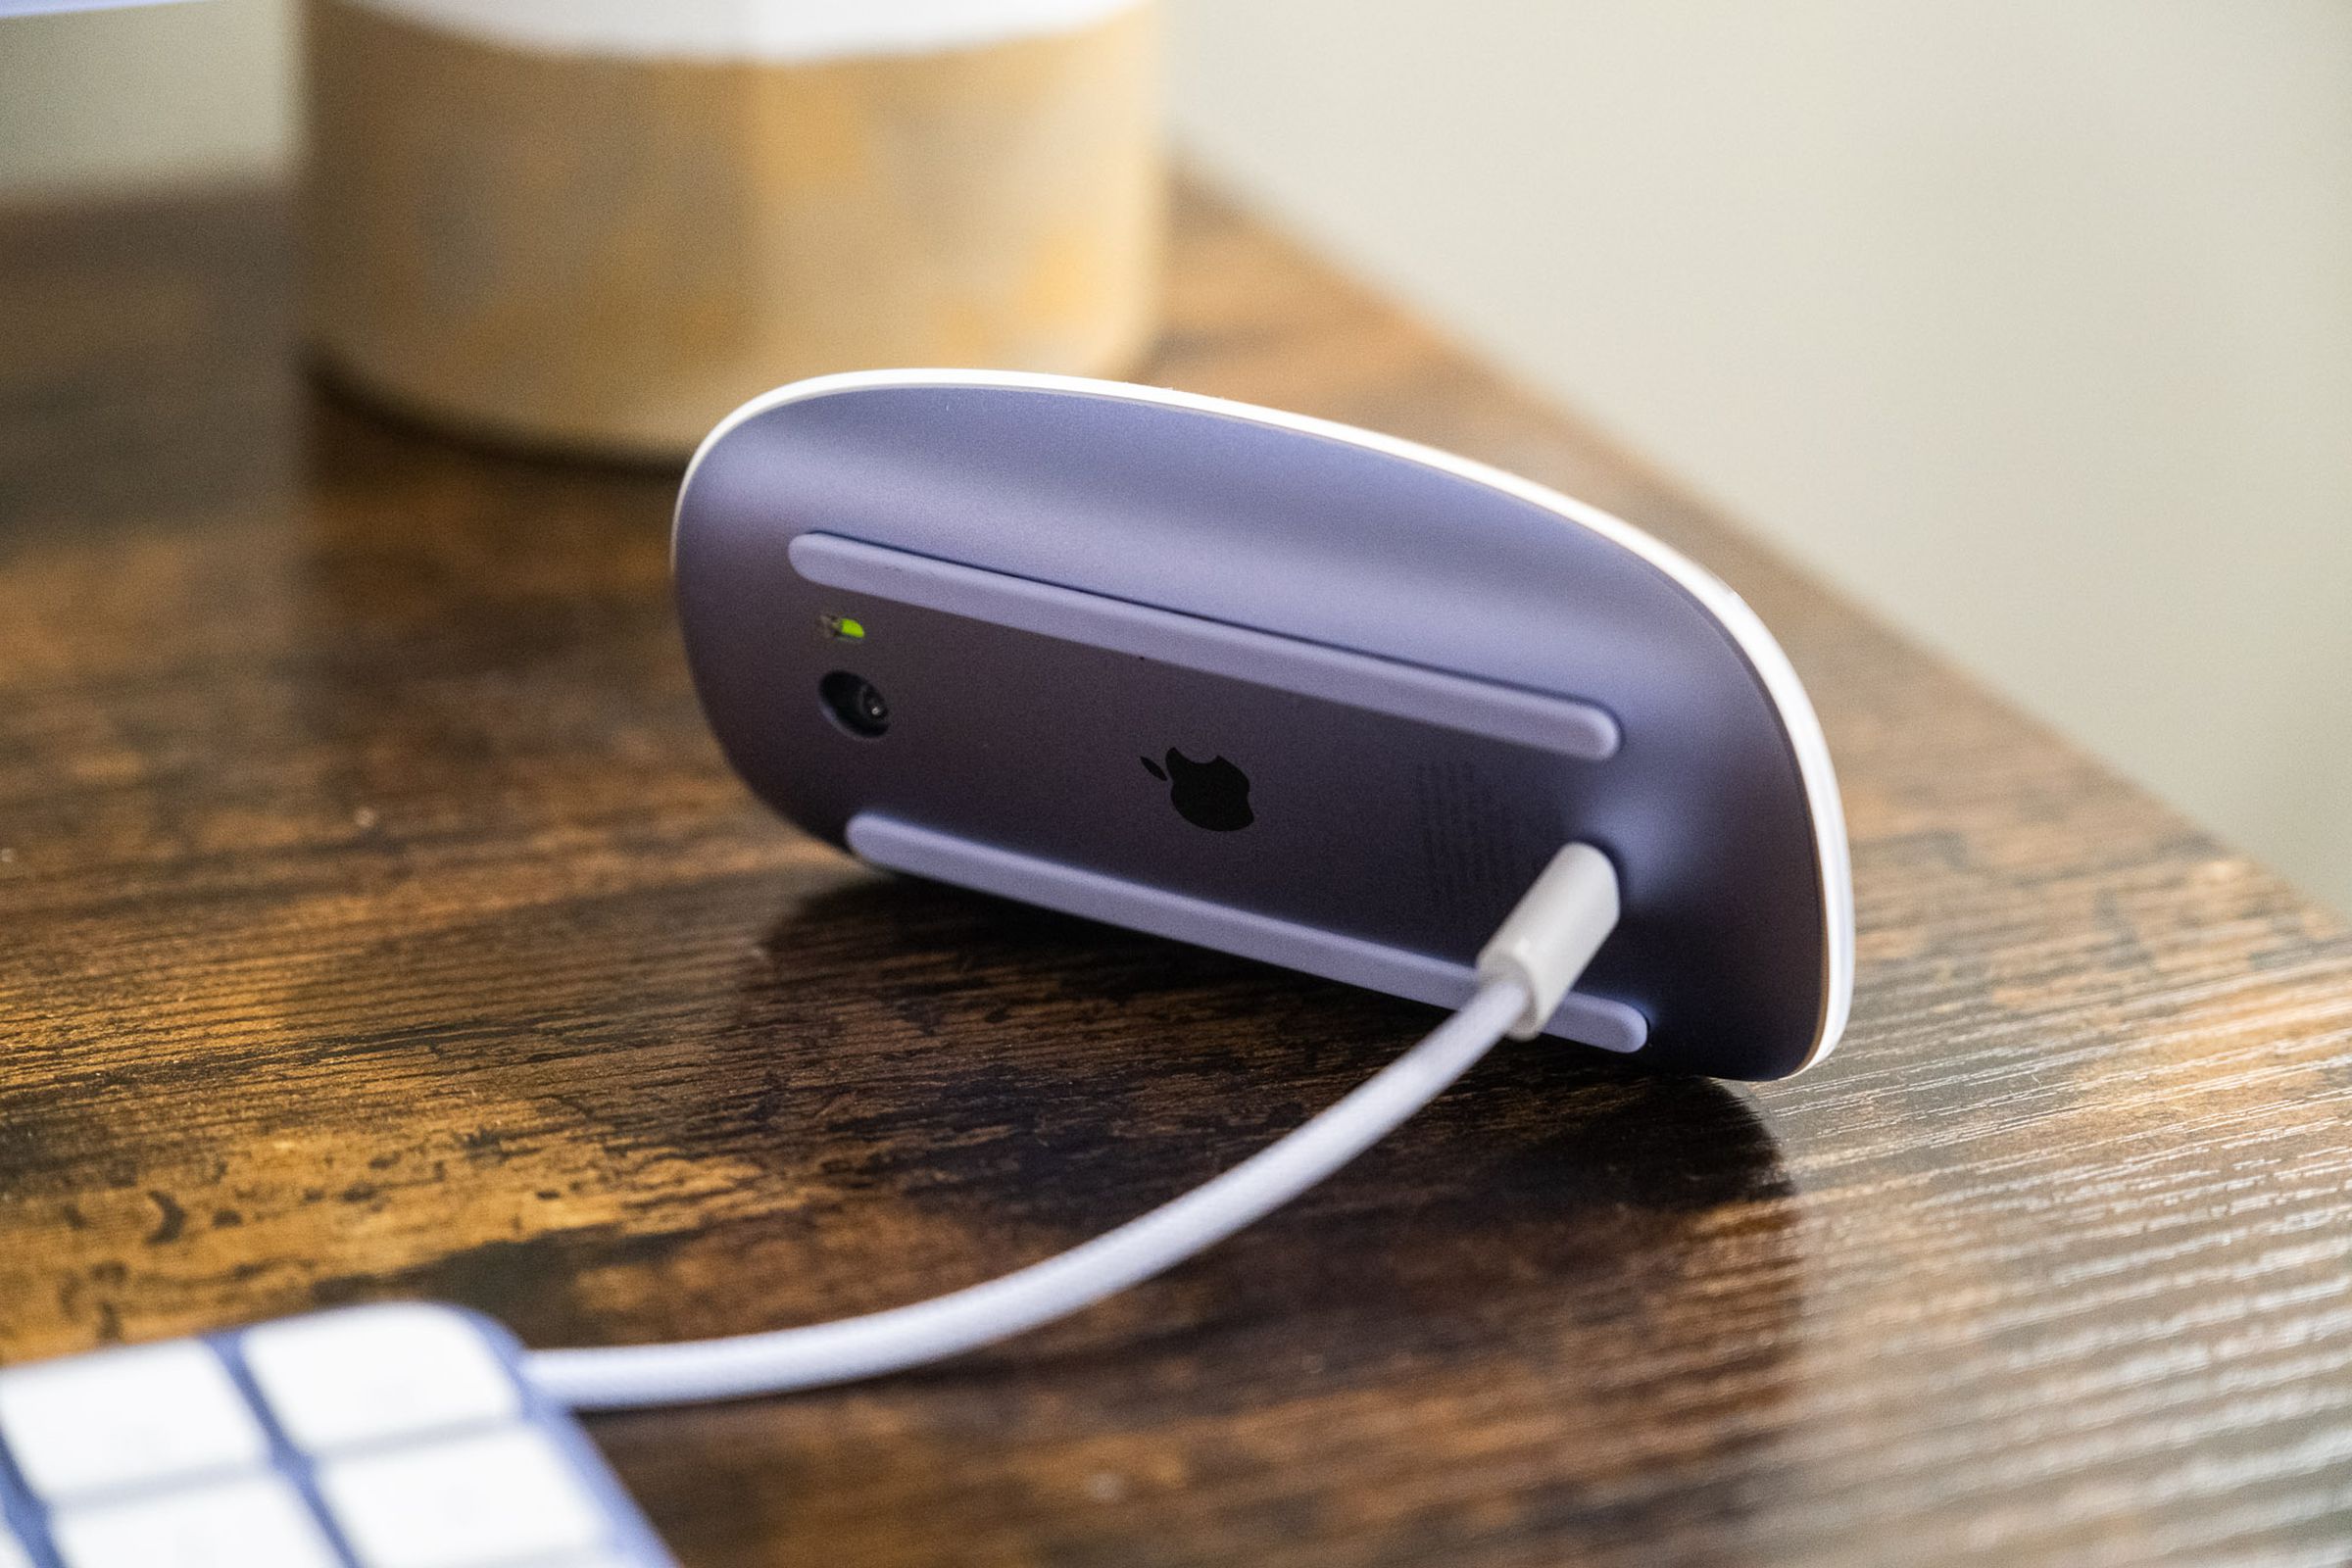 A purple Apple Magic Mouse charging via its Lightning port on the under side